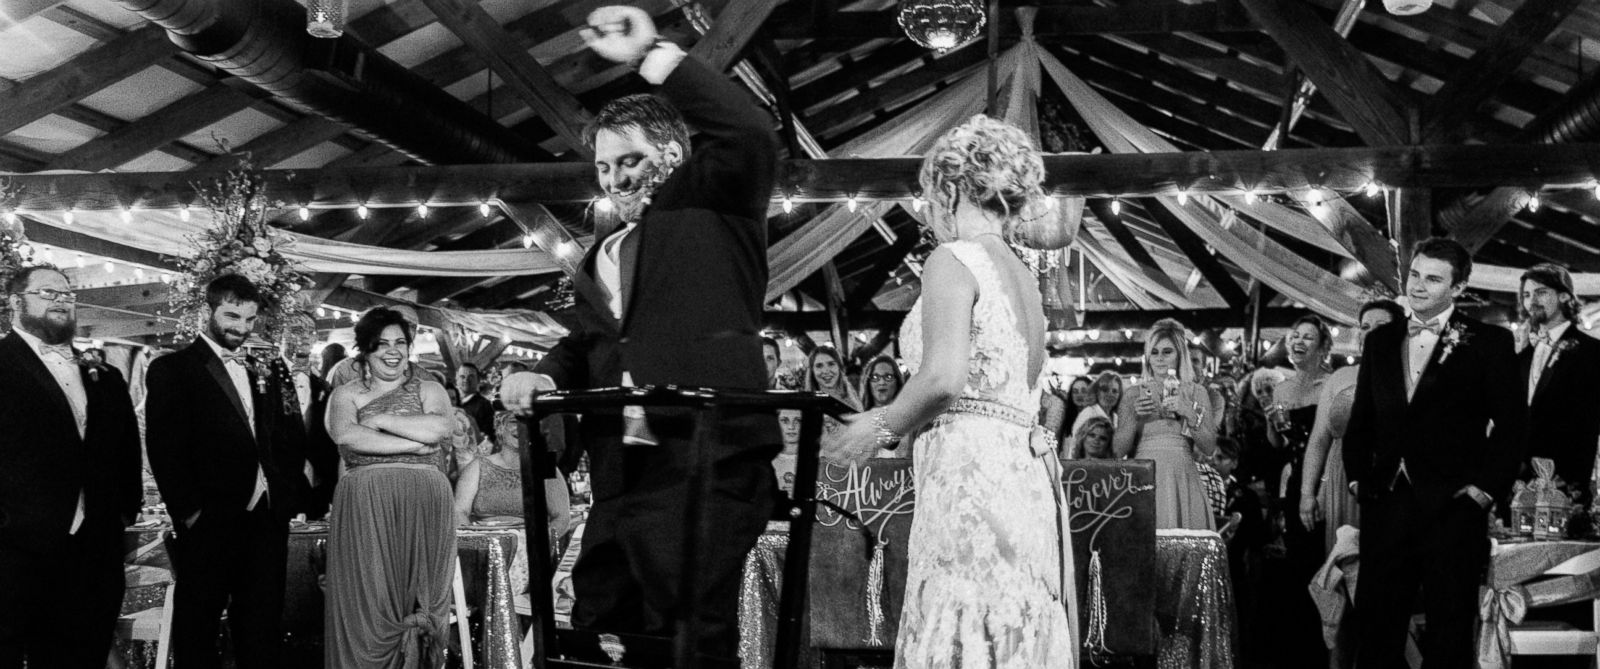 Spinal implant helps paralyzed groom stand, dance on his Wedding Day